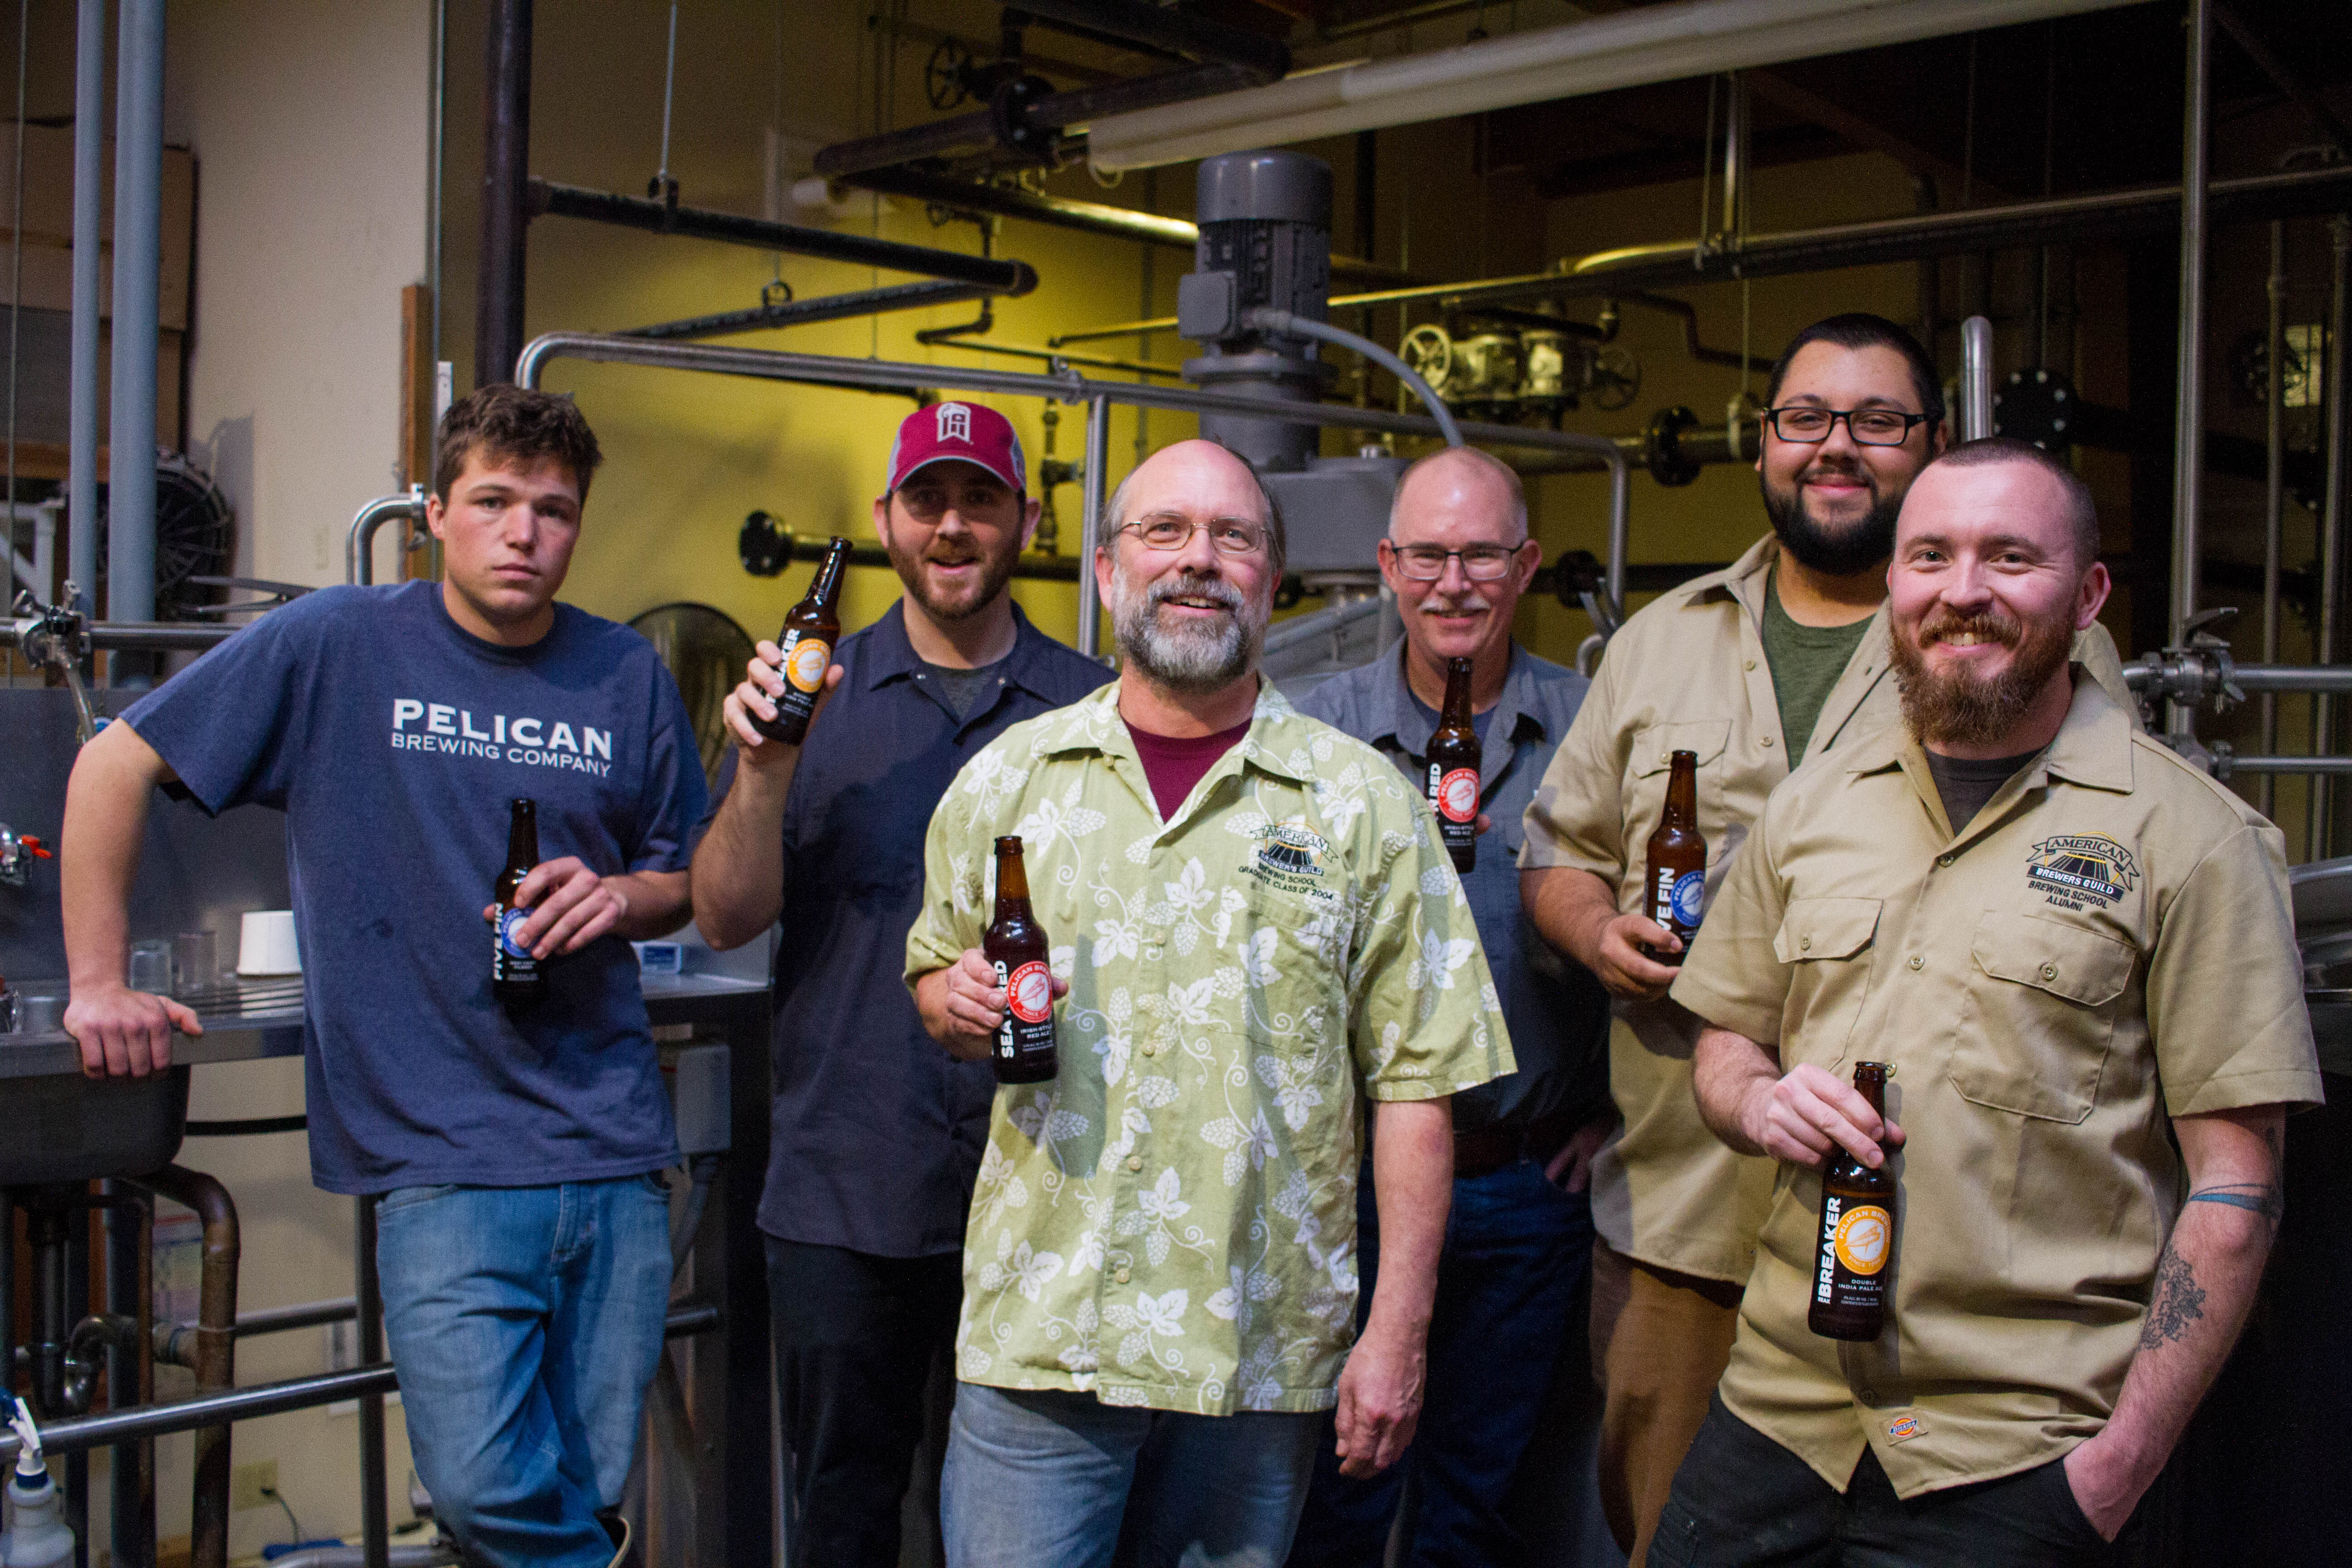 L to R: Buddy Pickett, currently studying with the American Brewers Guild, and current Pelican brewers who have graduated, Coren Tradd, Todd Campbell, Darron Welch, Jason Schlebach, Dan Grissom.